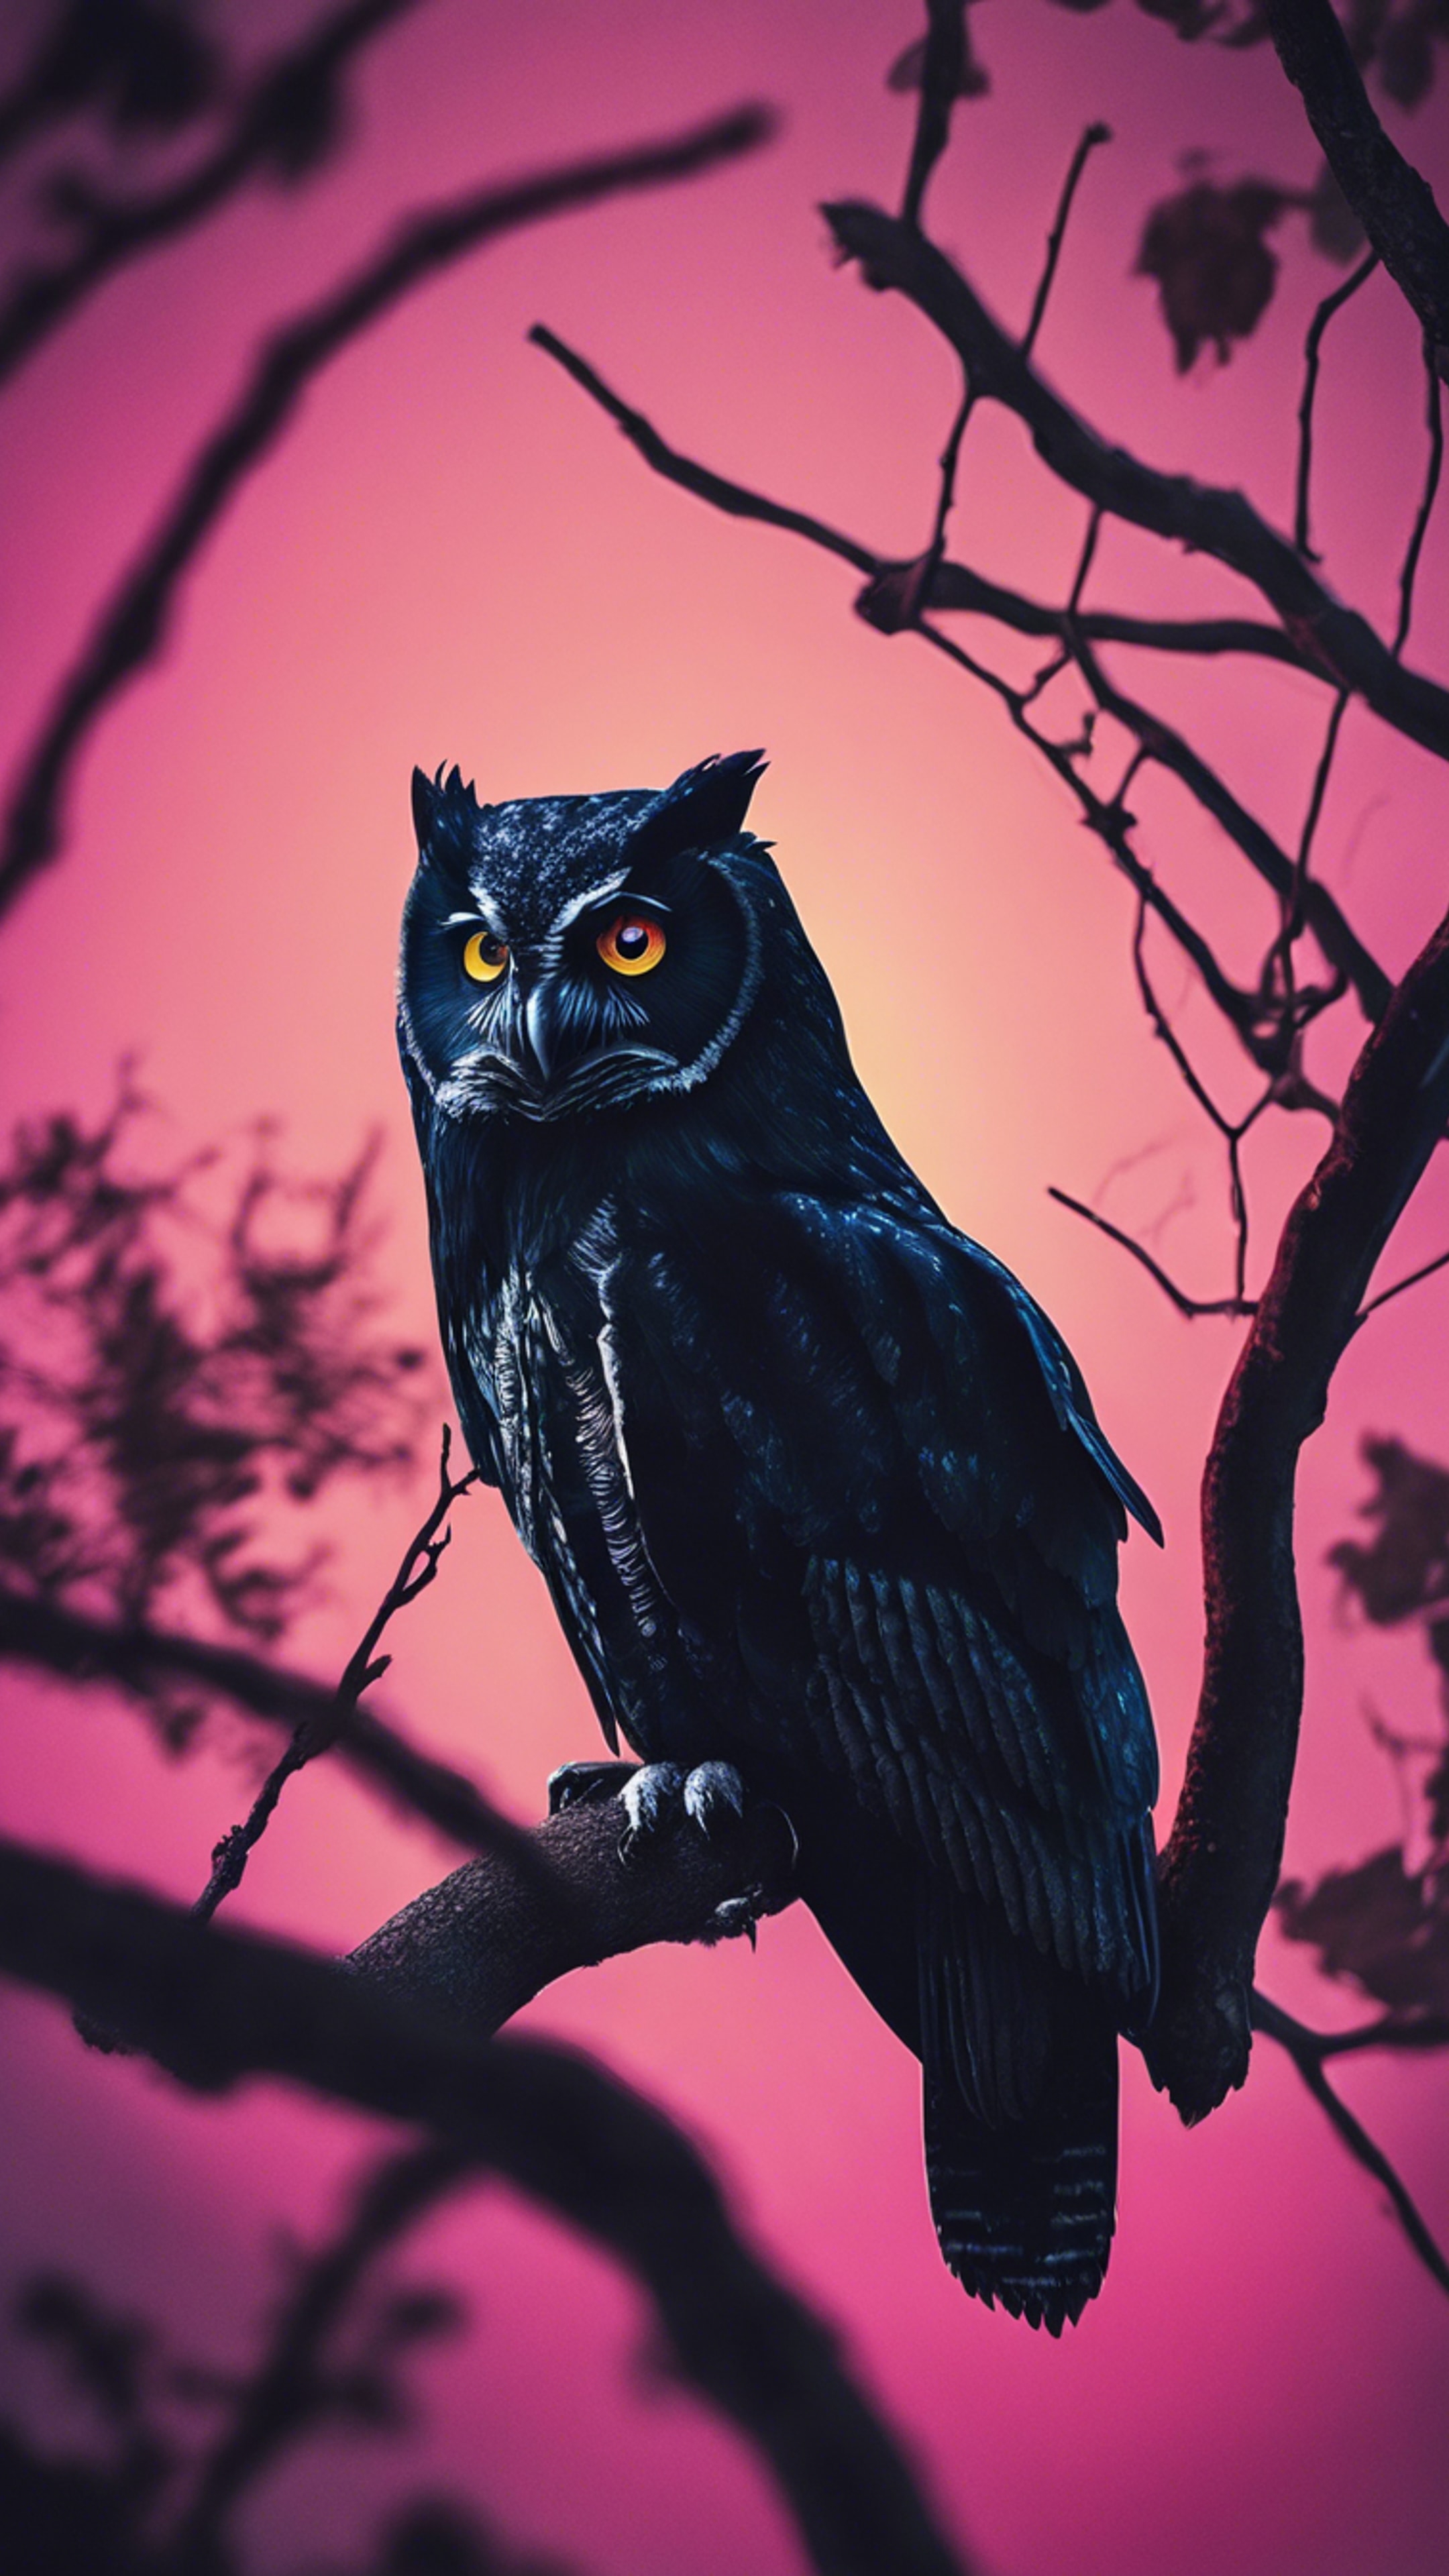 A pitch black owl, its eyes glowing in cool neon colors, perched on a tree branch on a moonless night. ورق الجدران[de9c9fccdafb4c81814c]